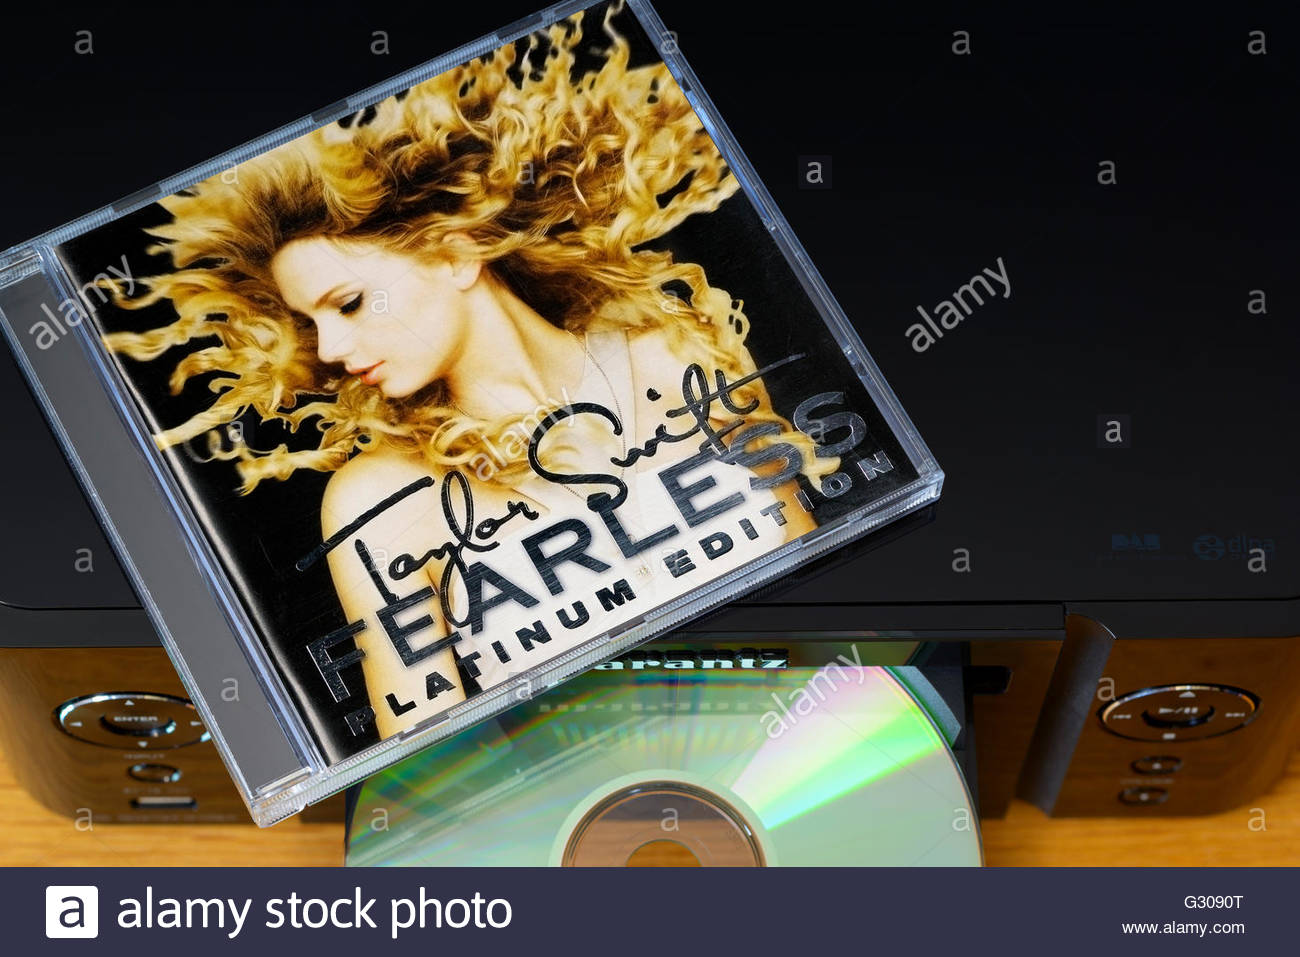 Taylor Swift Album Fearless Music Centre And Cd Case